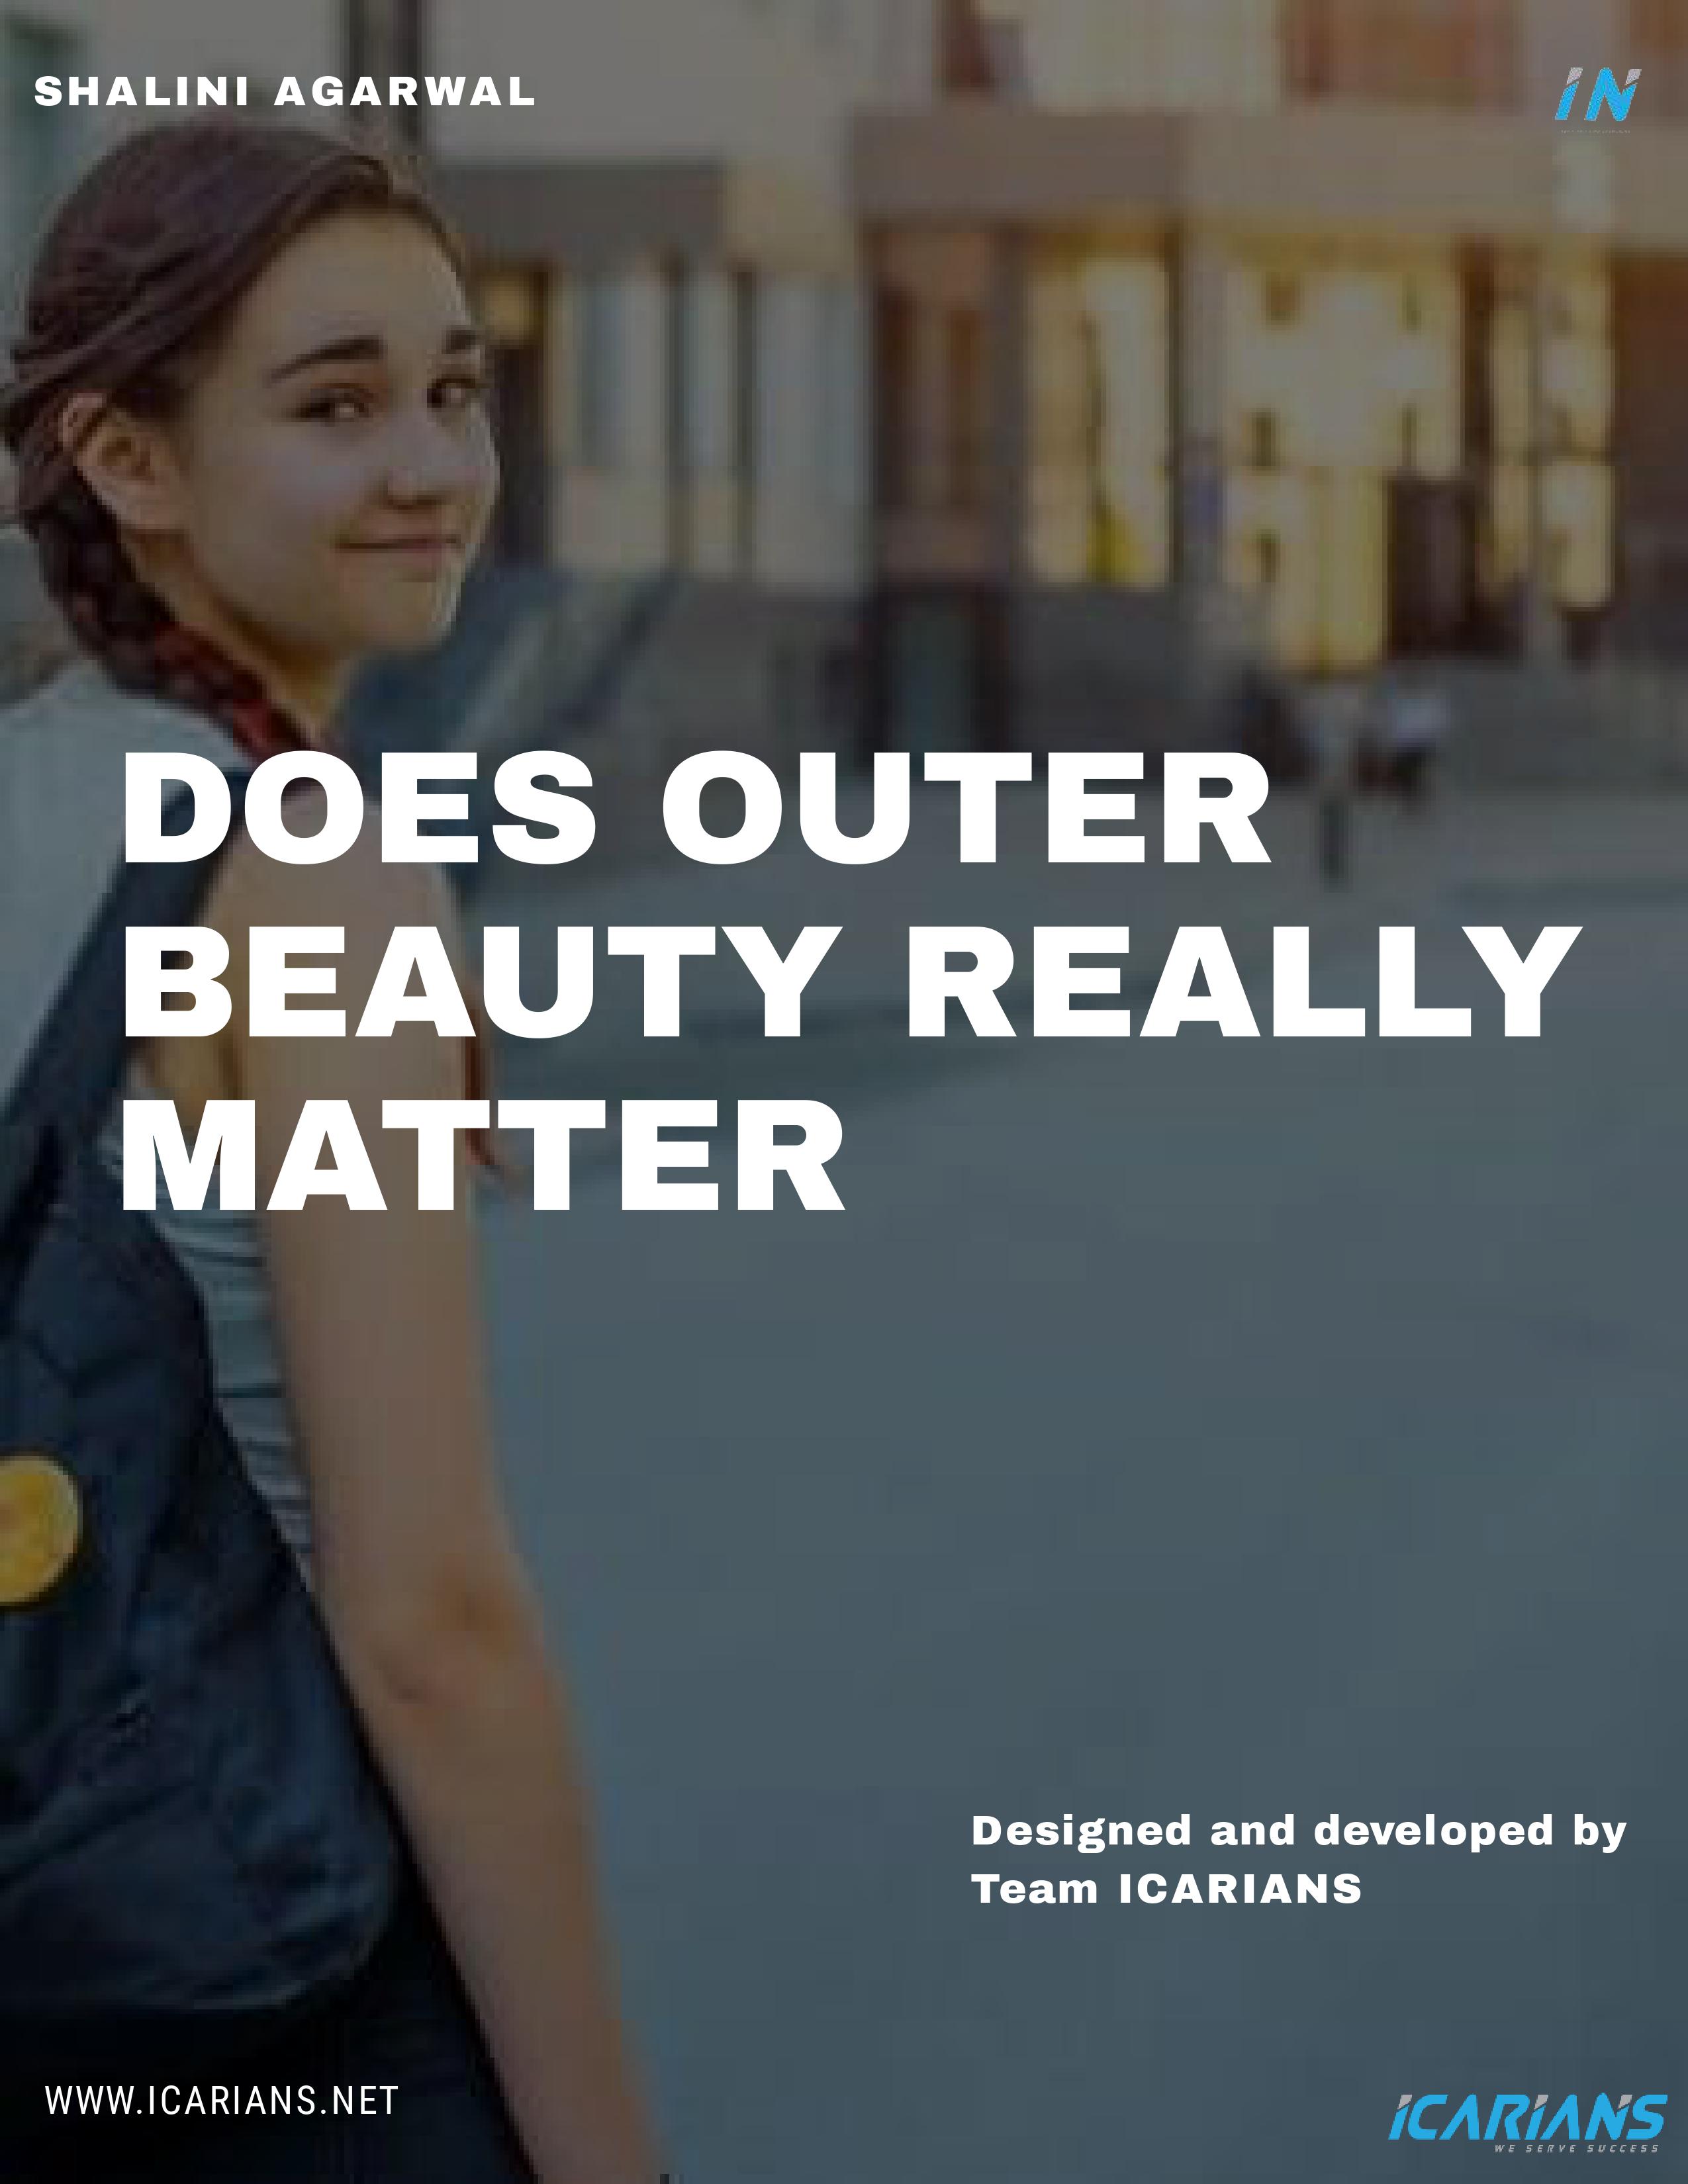 DOES OUTER BEAUTY REALLY MATTER